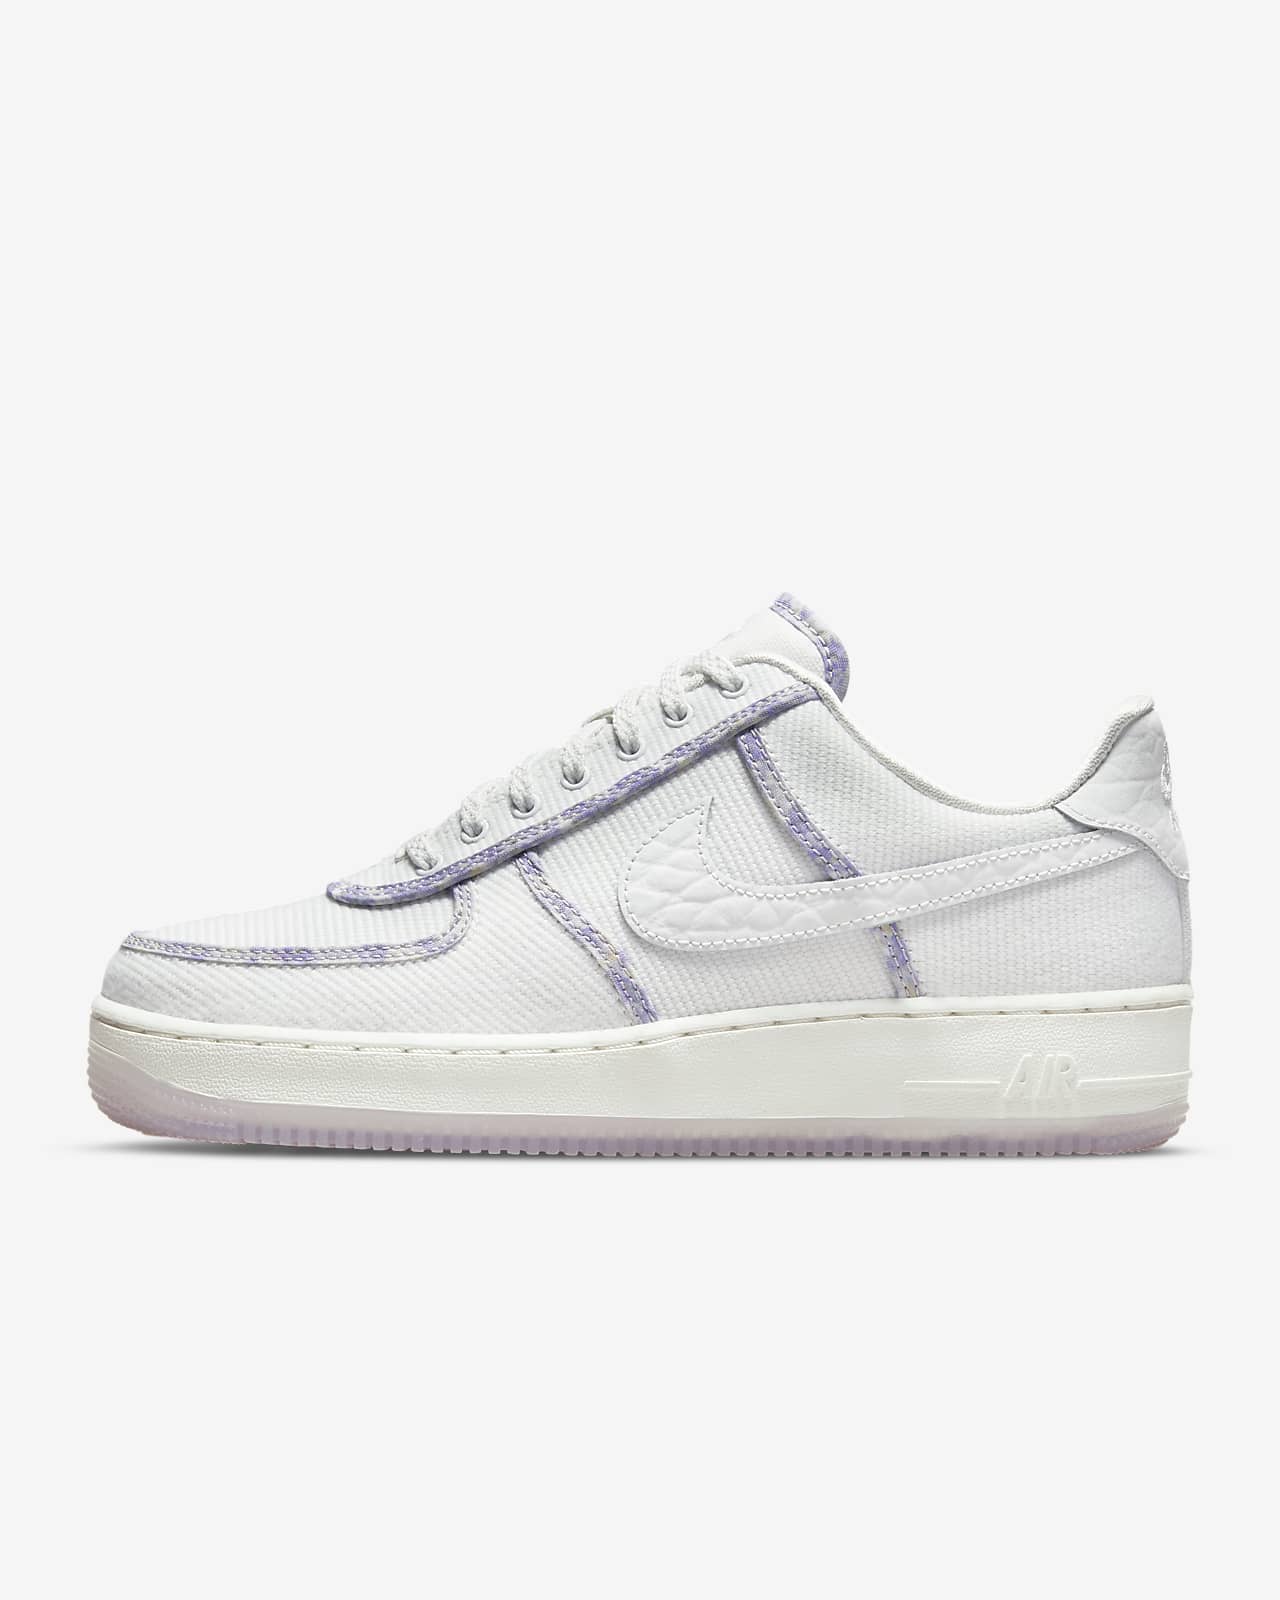 Chaussure Nike Air Force 1 Low pour Femme